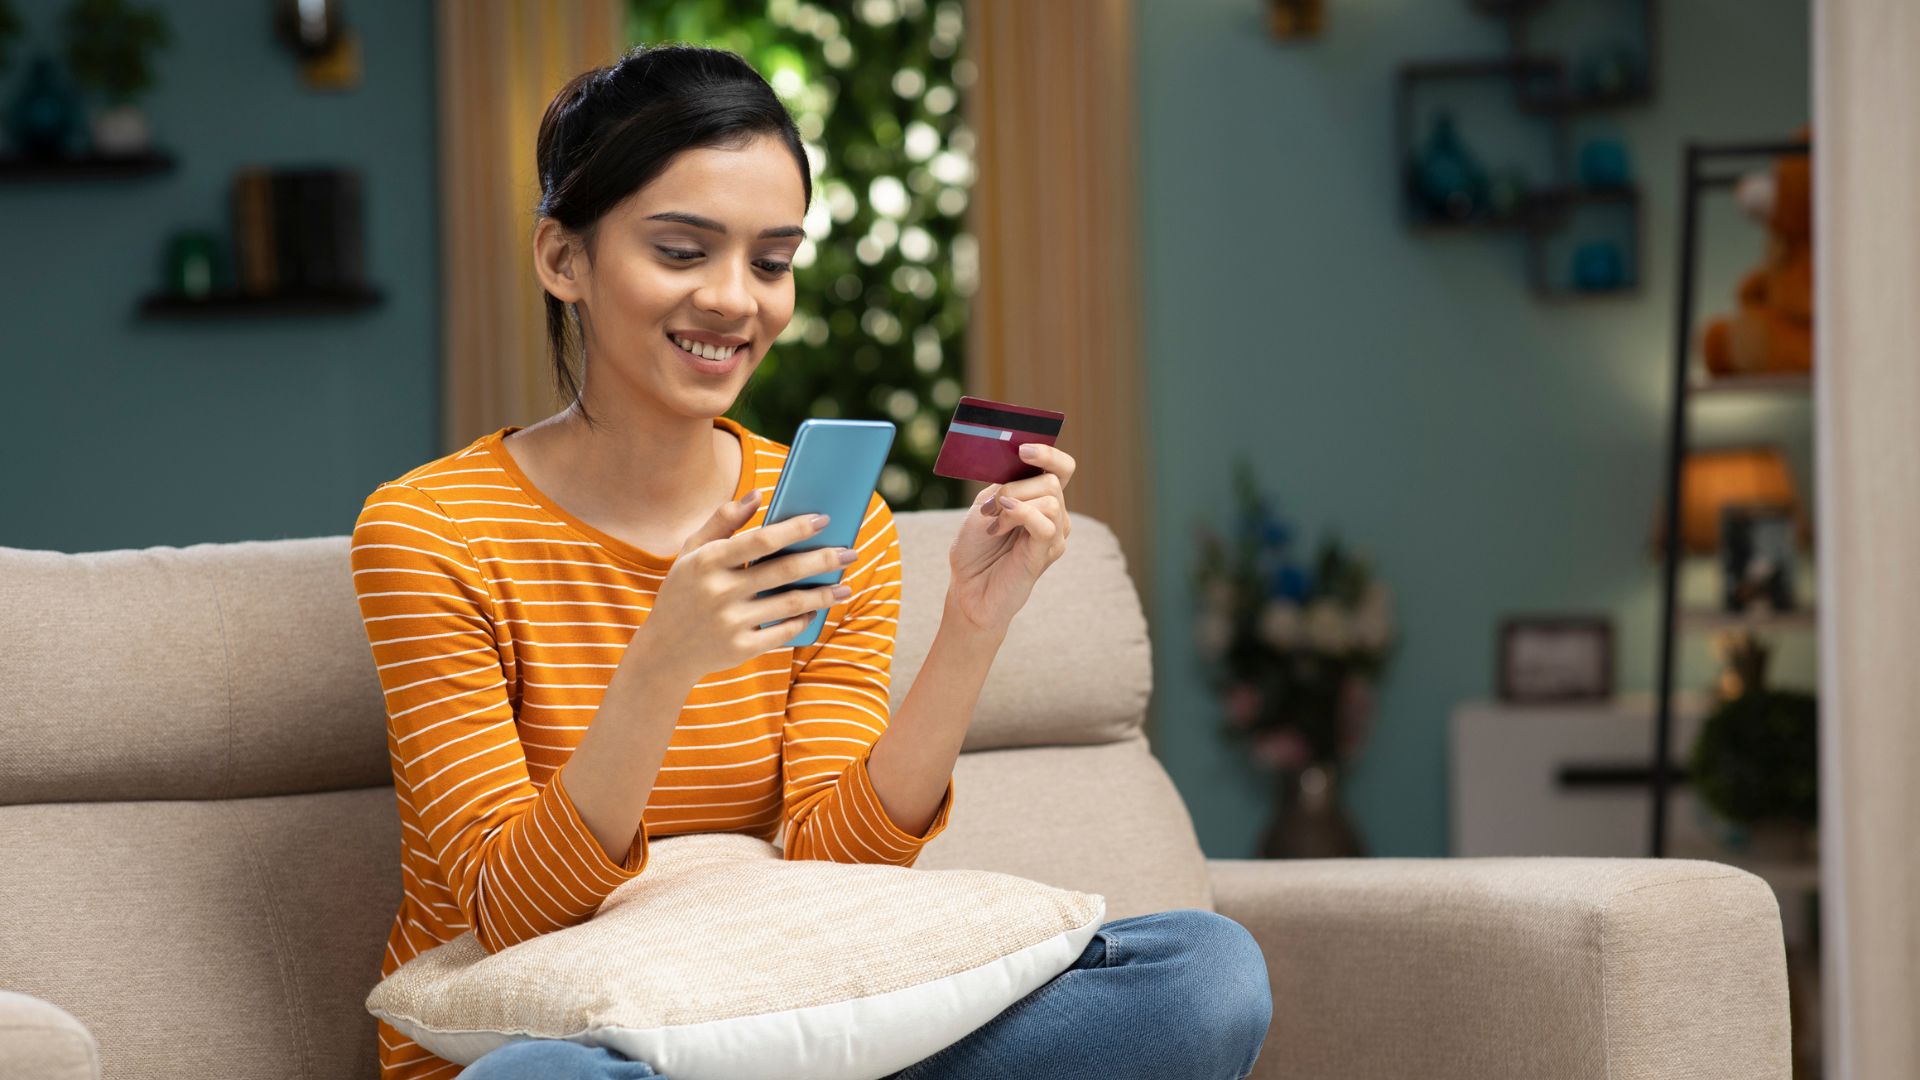 Woman sitting down on couch with phone and credit card in hand.